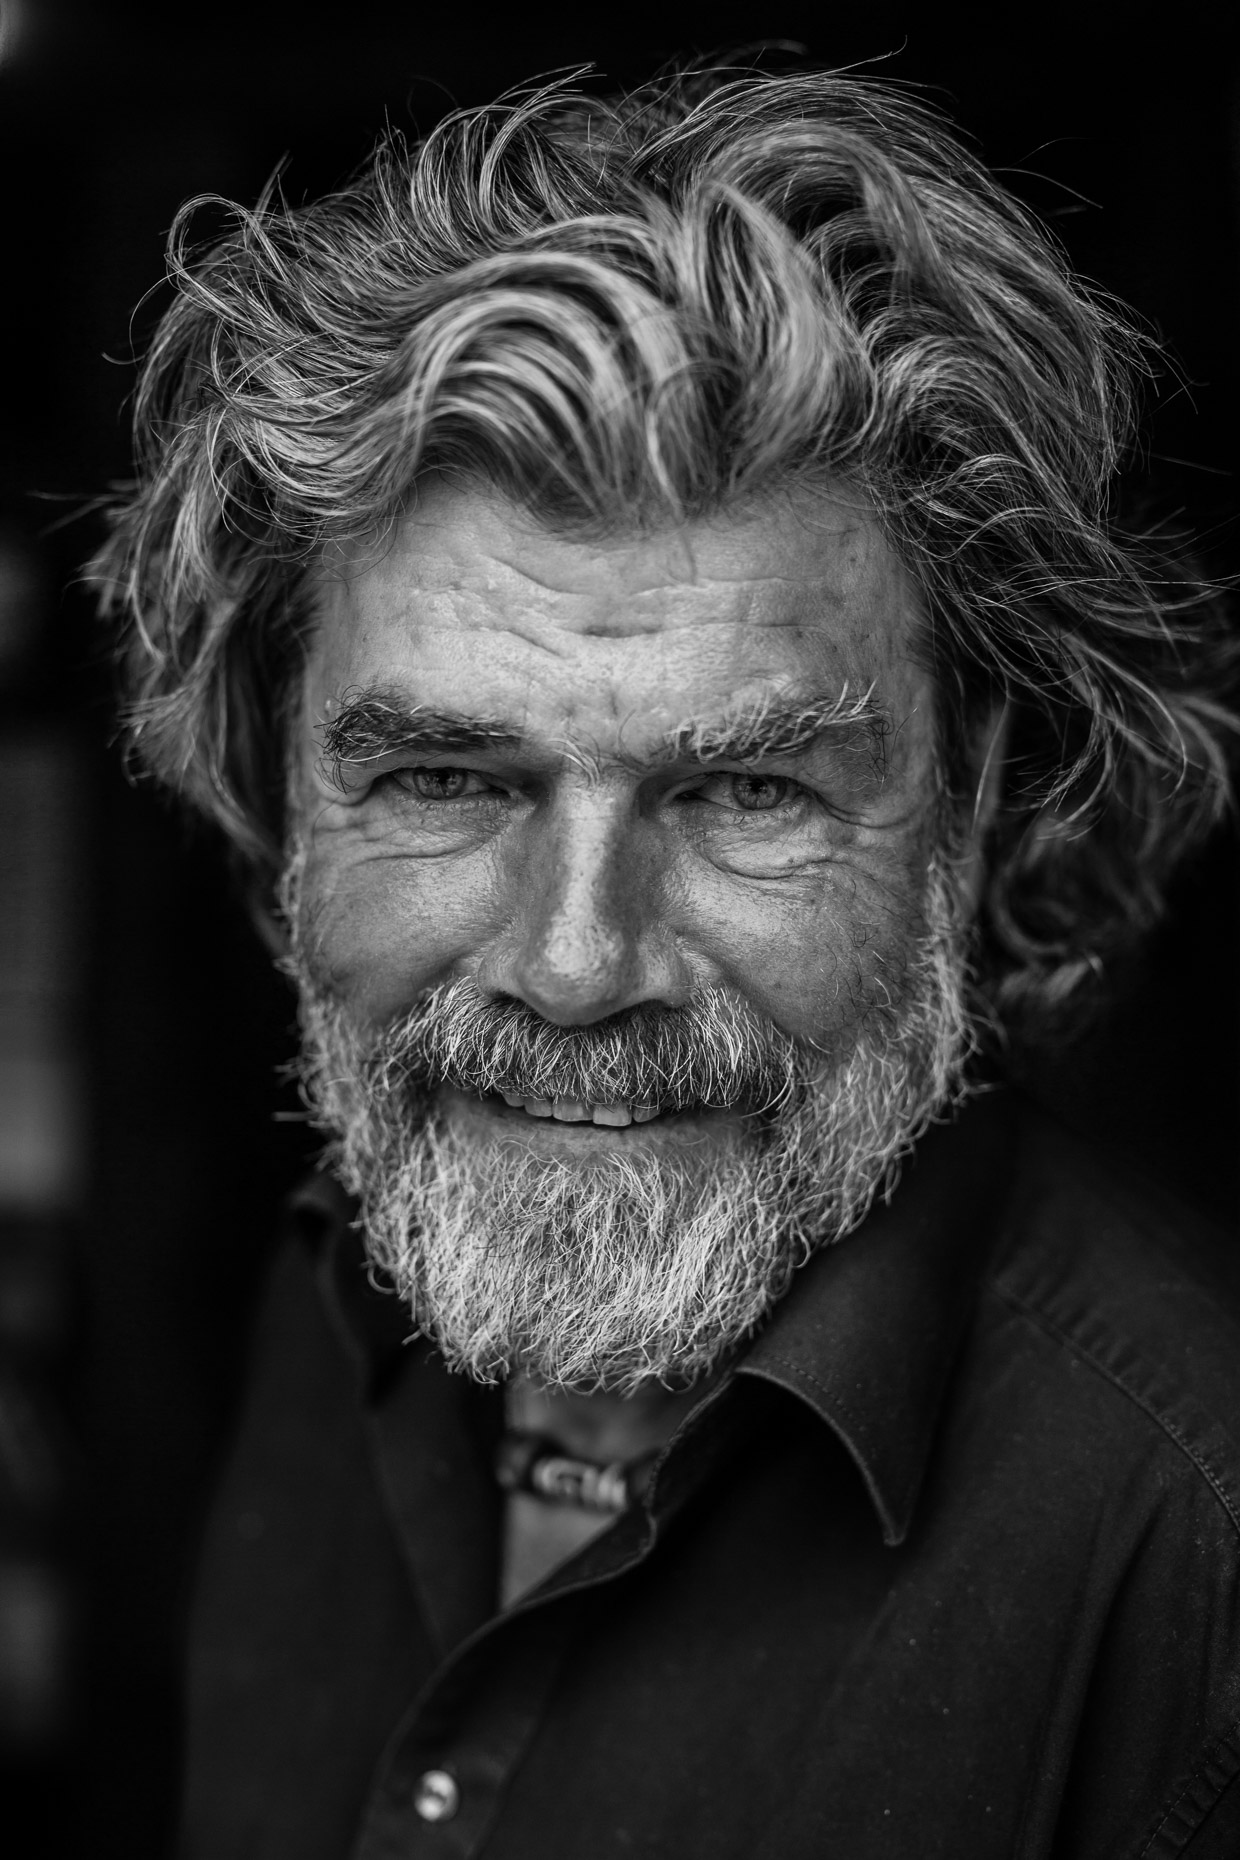 Stiphout_reinhold-messner-aug16-9